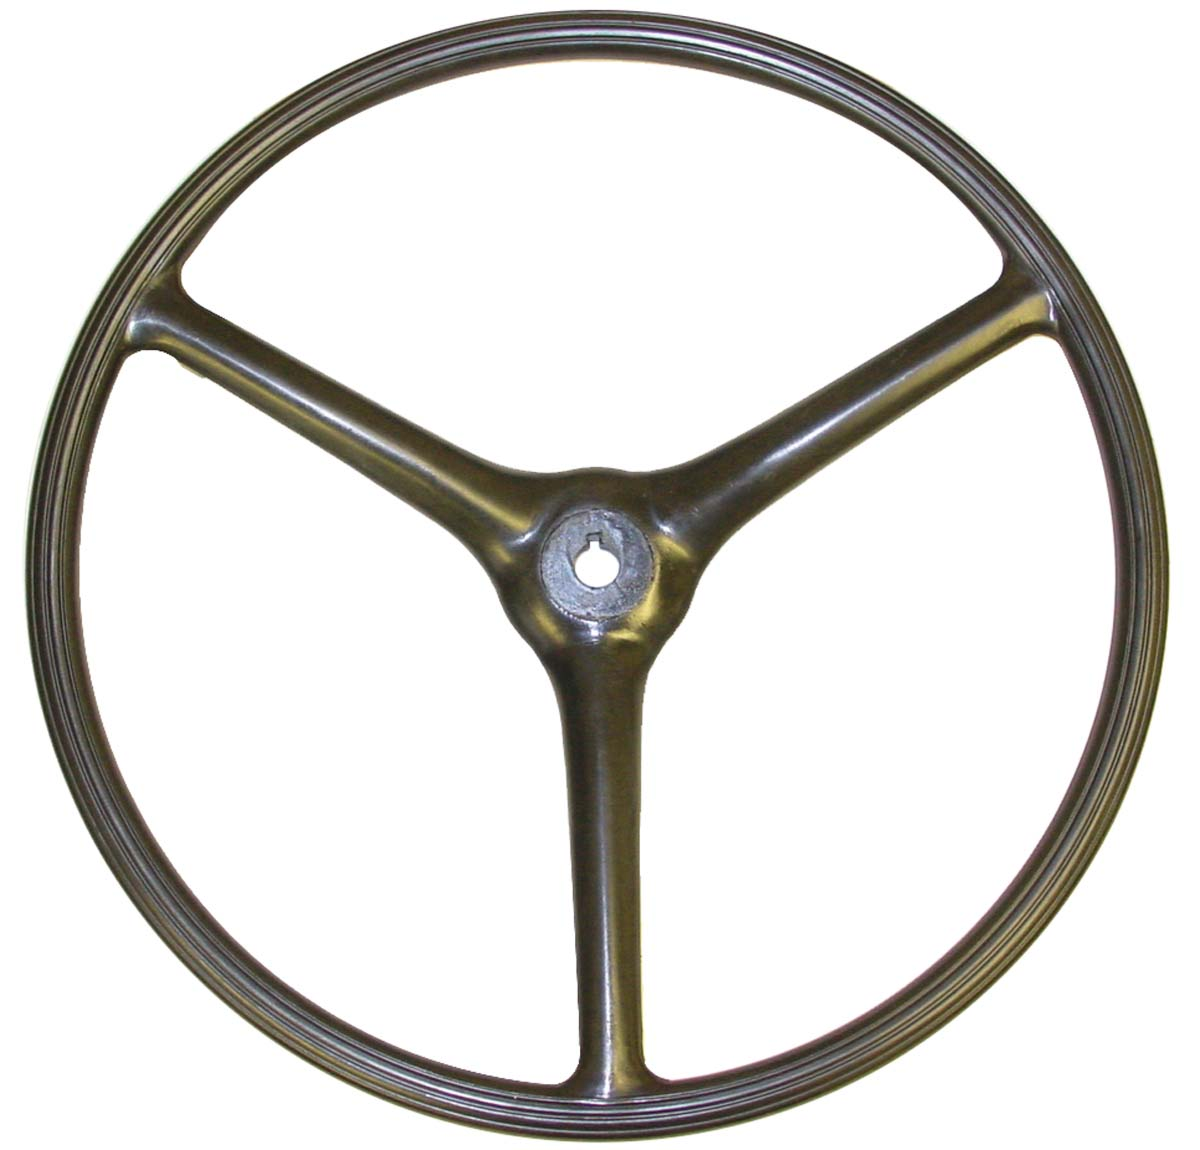 Steering wheel for ford 8n tractor